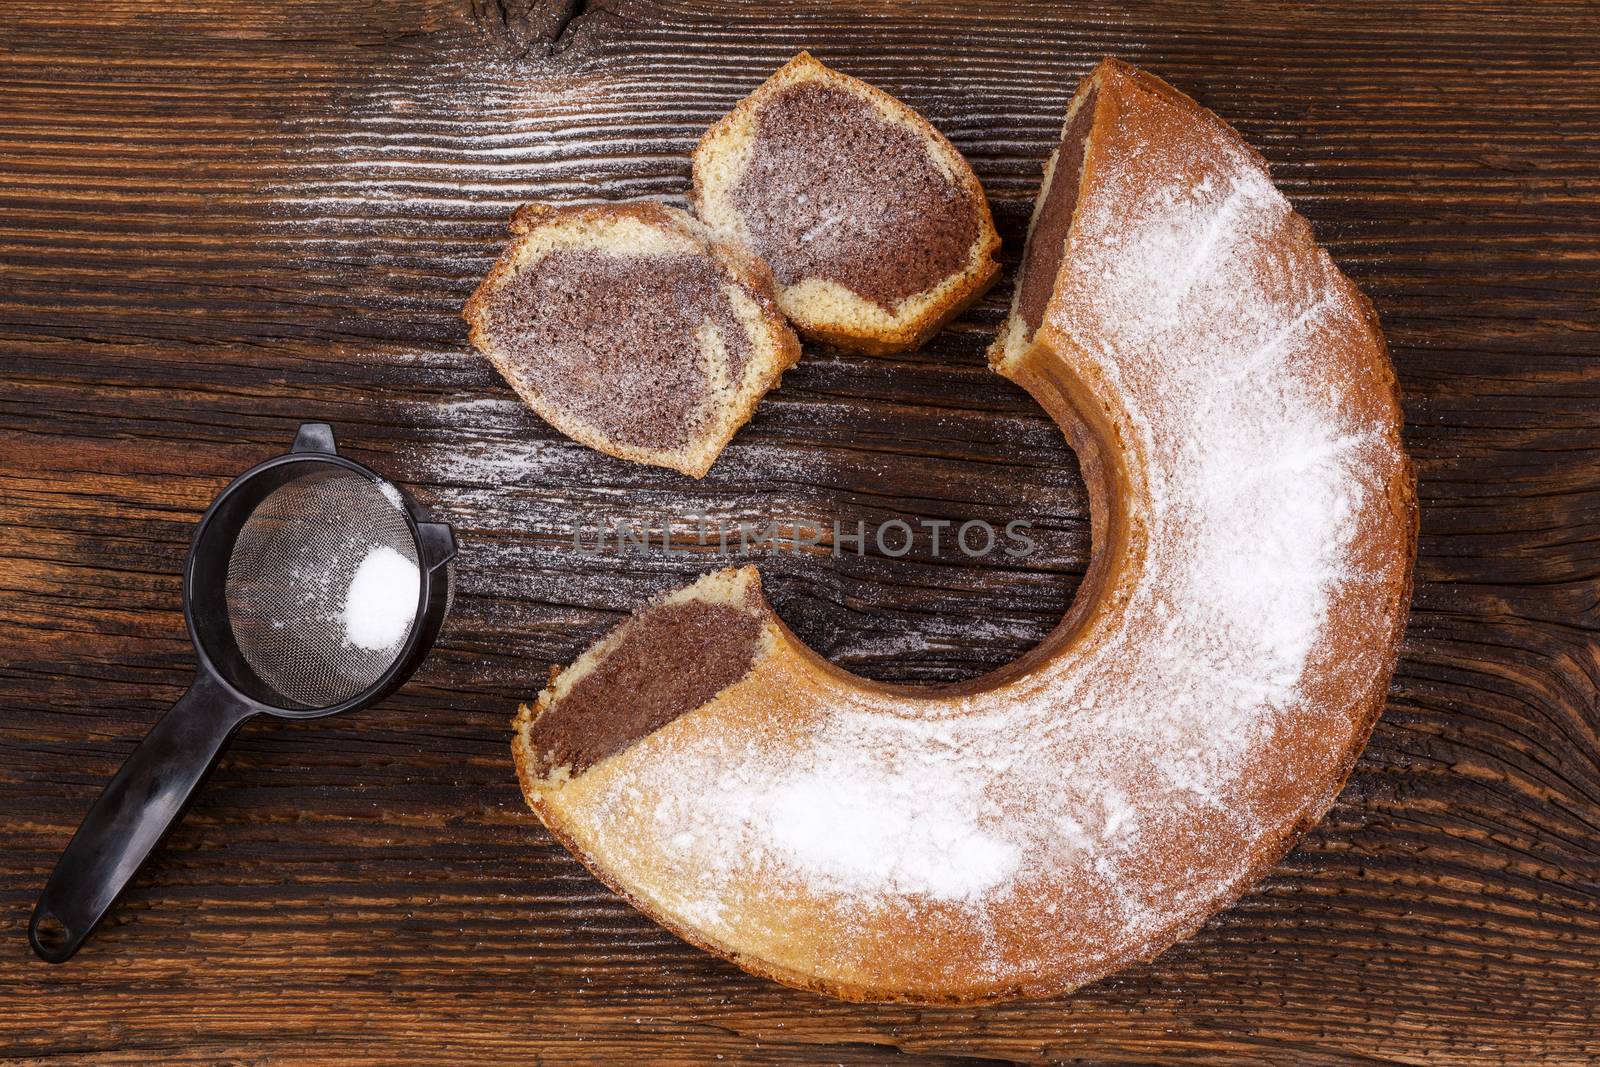 Delicious bundt cake on wooden table, top view. Traditional european sweet bundt cake.